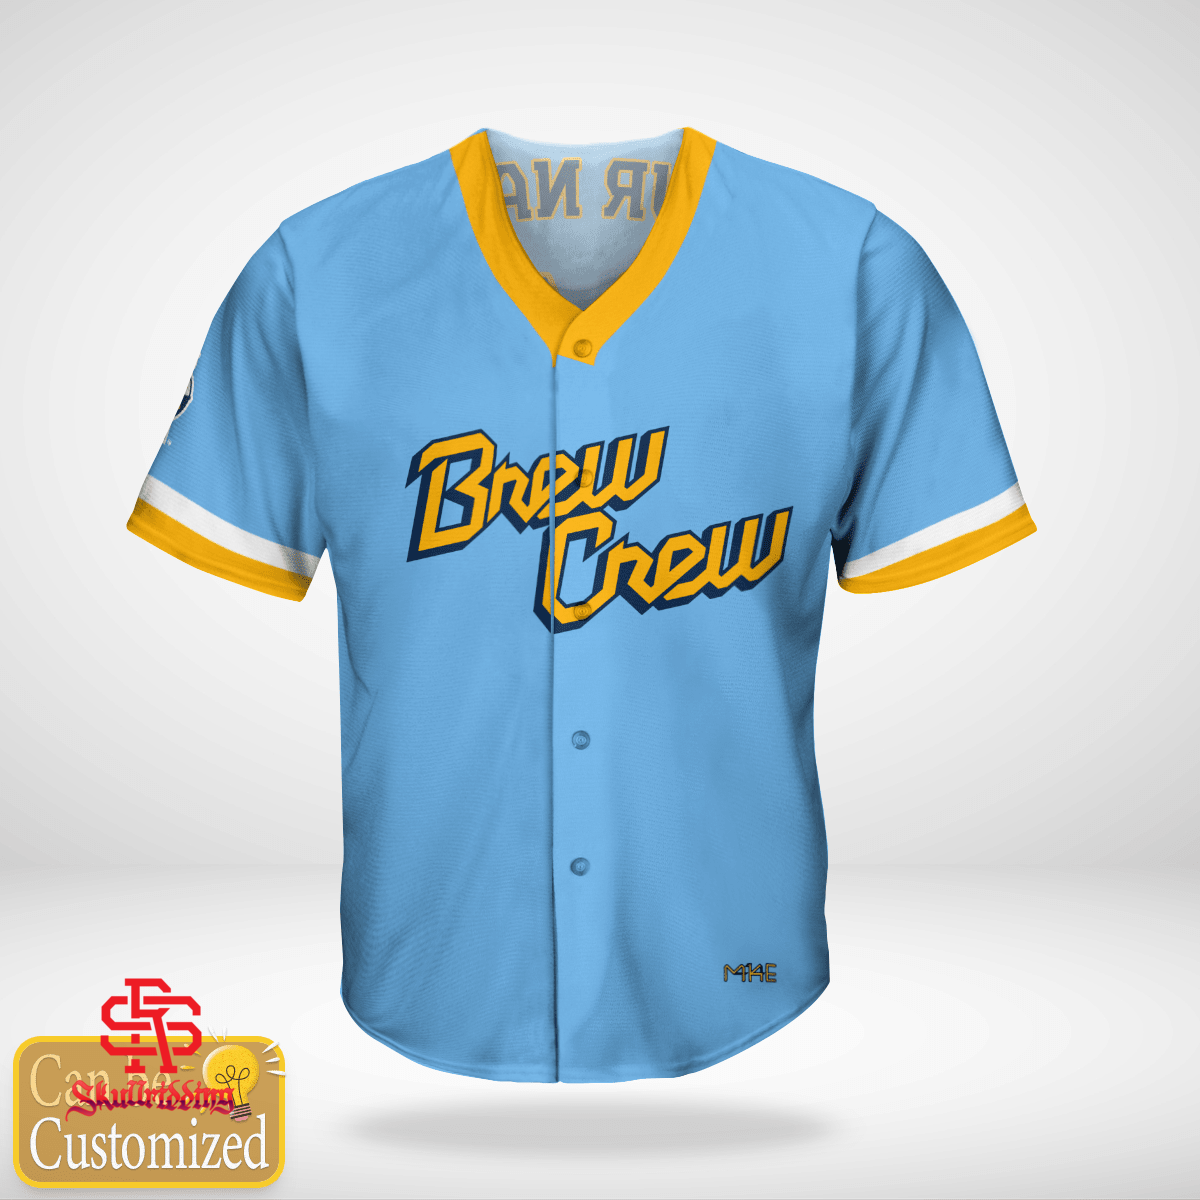 Buy The brew crew milwaukee brewers signature shirt For Free Shipping  CUSTOM XMAS PRODUCT COMPANY